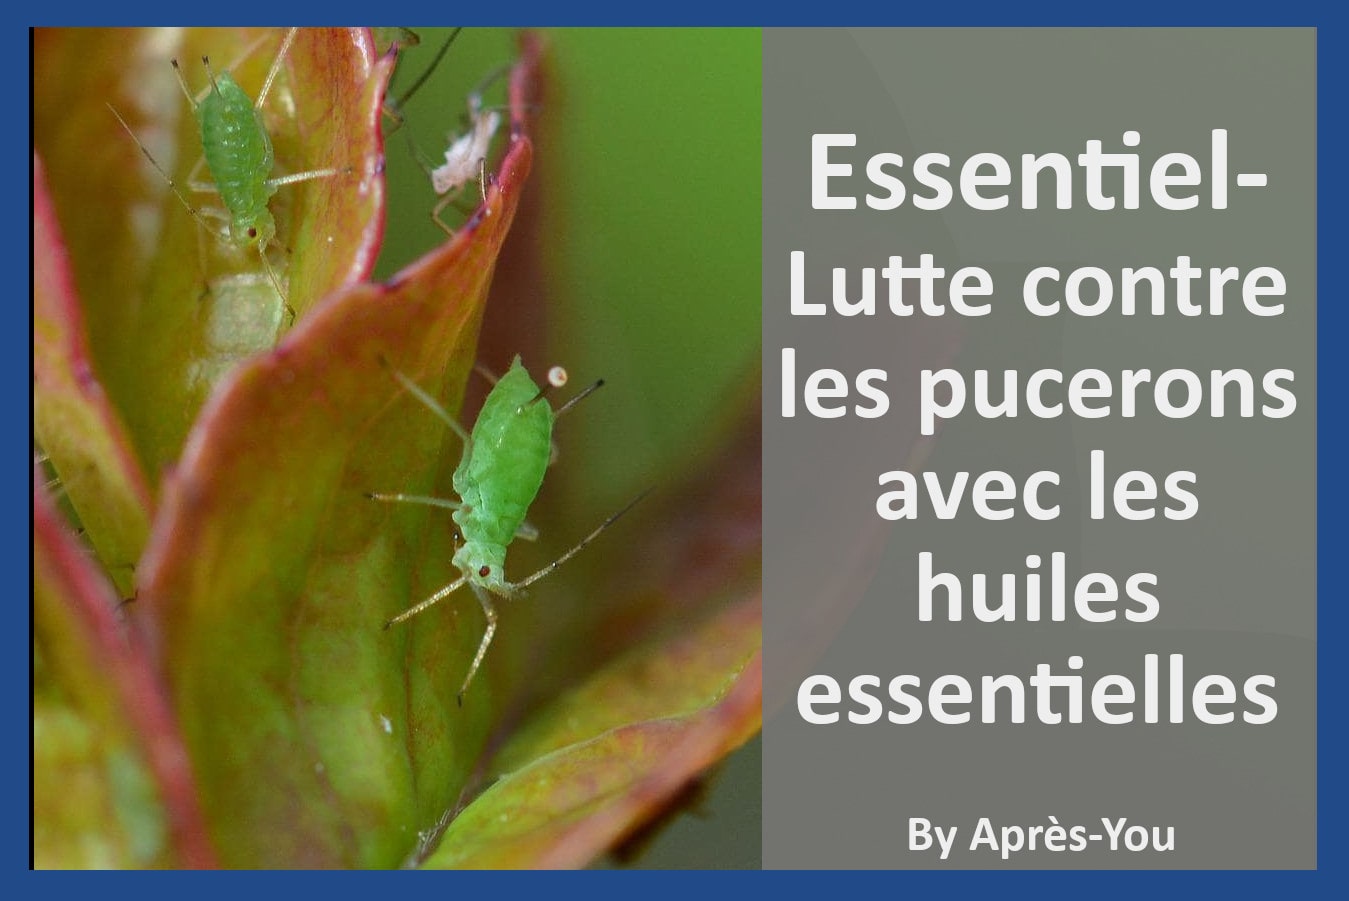 Blog article about aphids and essential oils in French